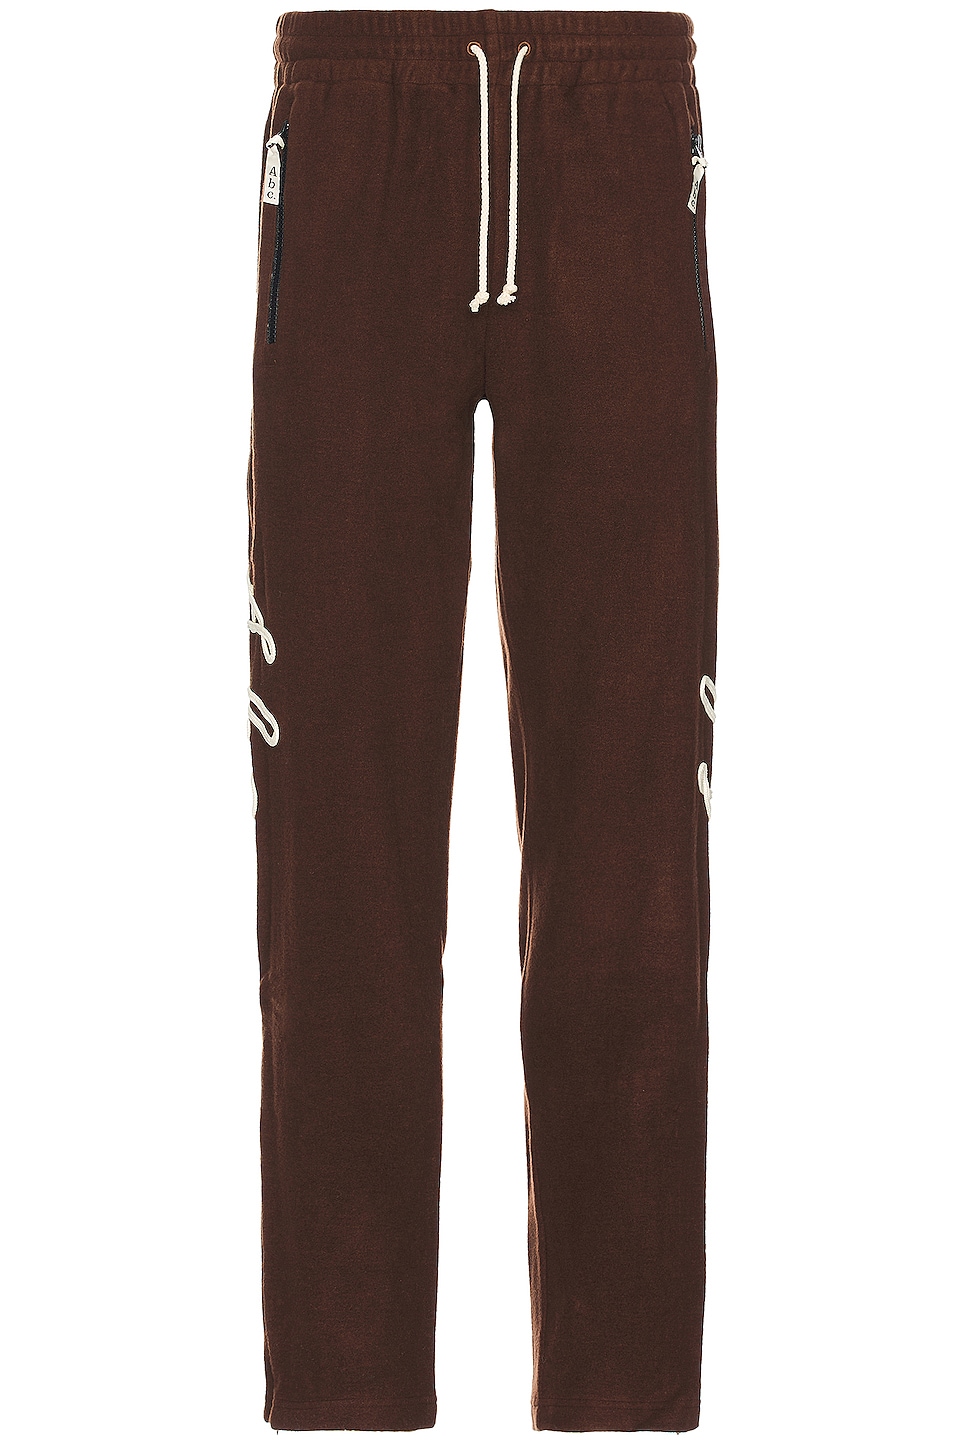 Image 1 of Advisory Board Crystals Wool Track Pant in Wool Traok